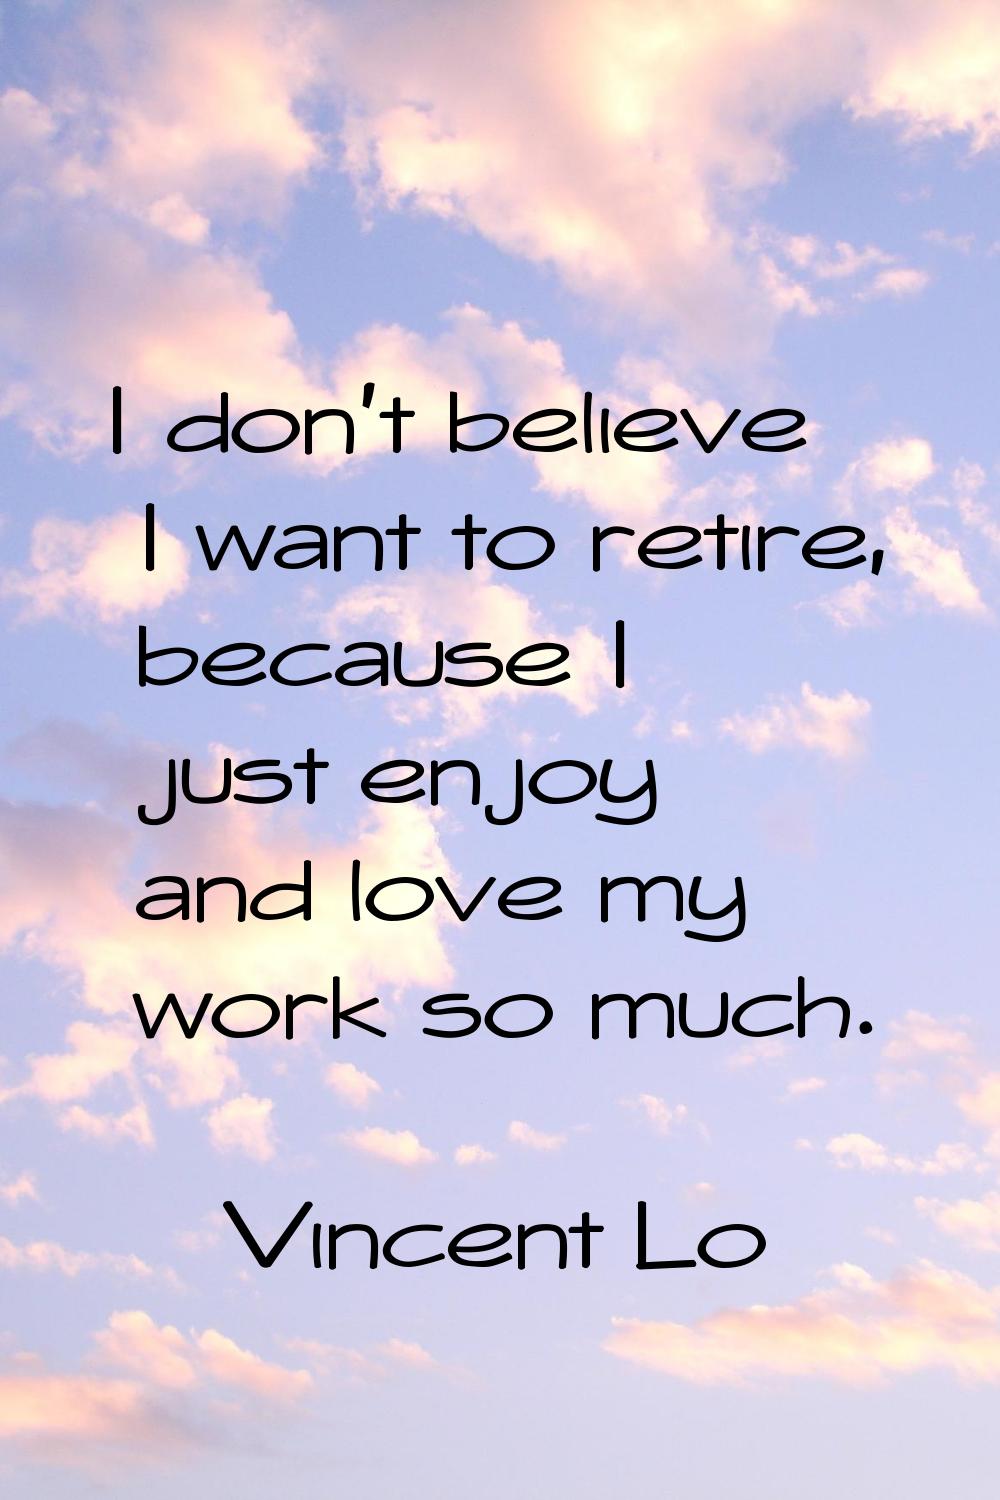 I don't believe I want to retire, because I just enjoy and love my work so much.